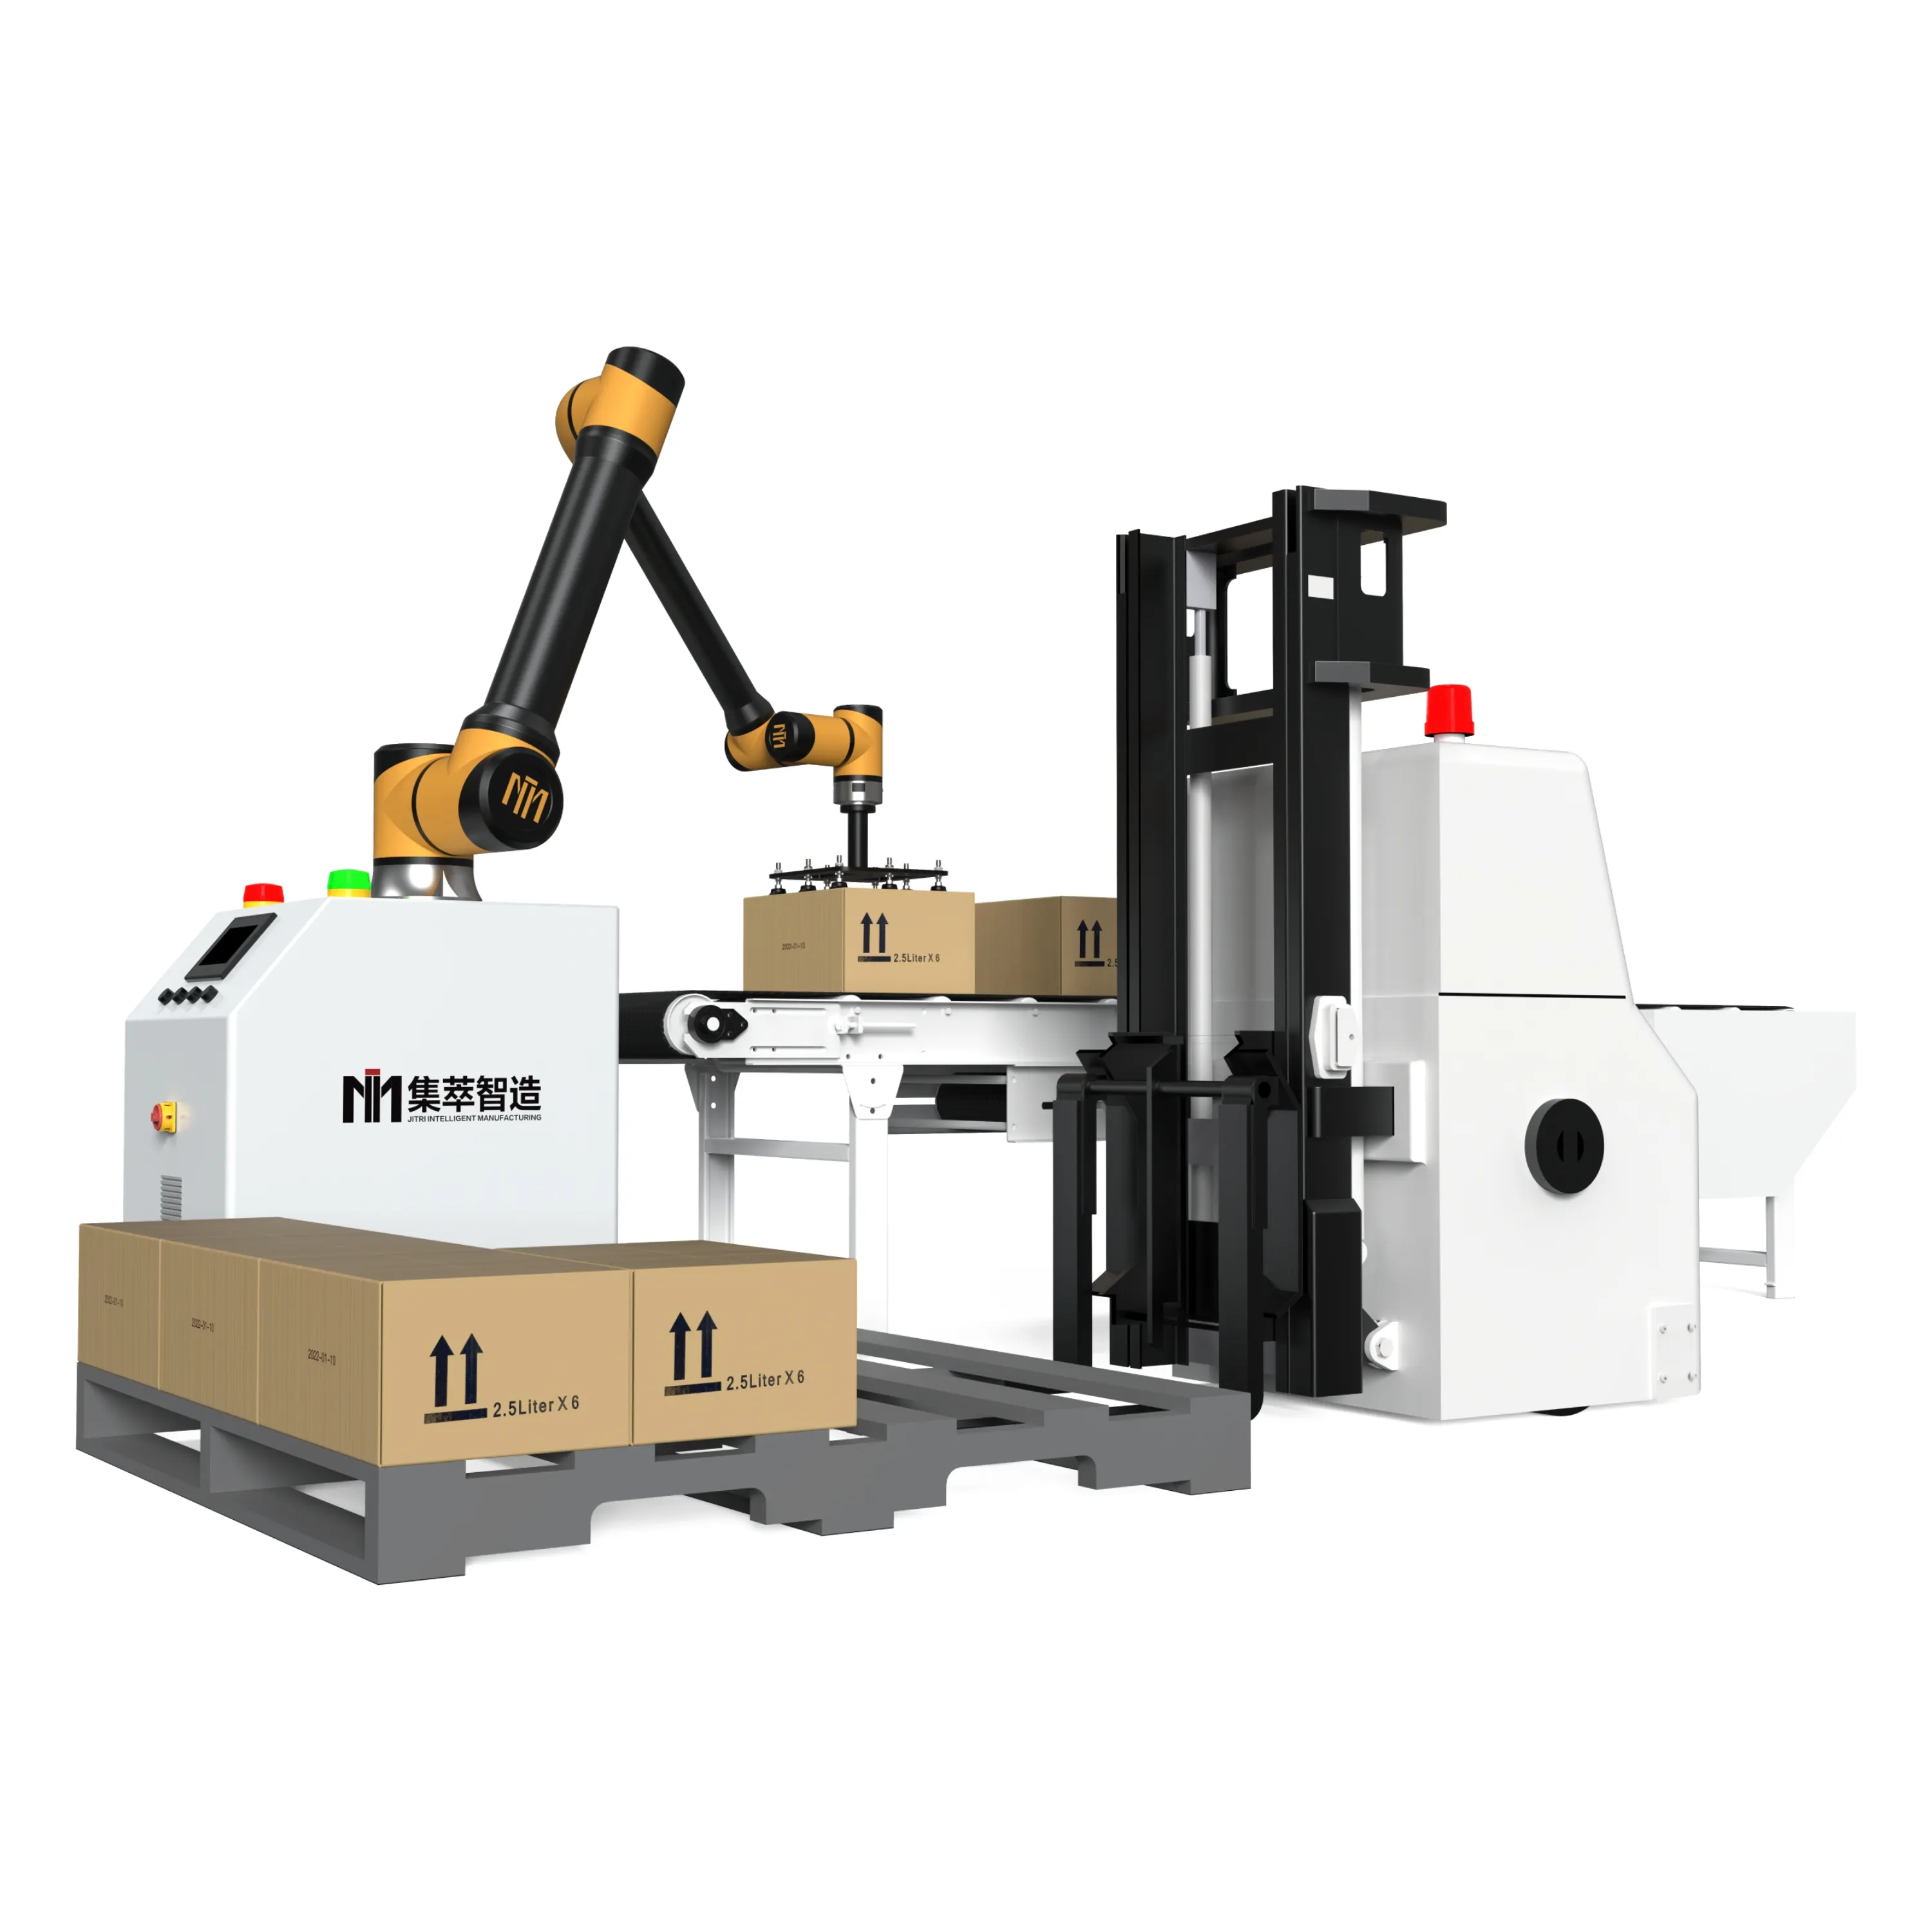 6 Axis Collaborative Robot Automatic Pallet Making Strapping Machine para Automação Industrial